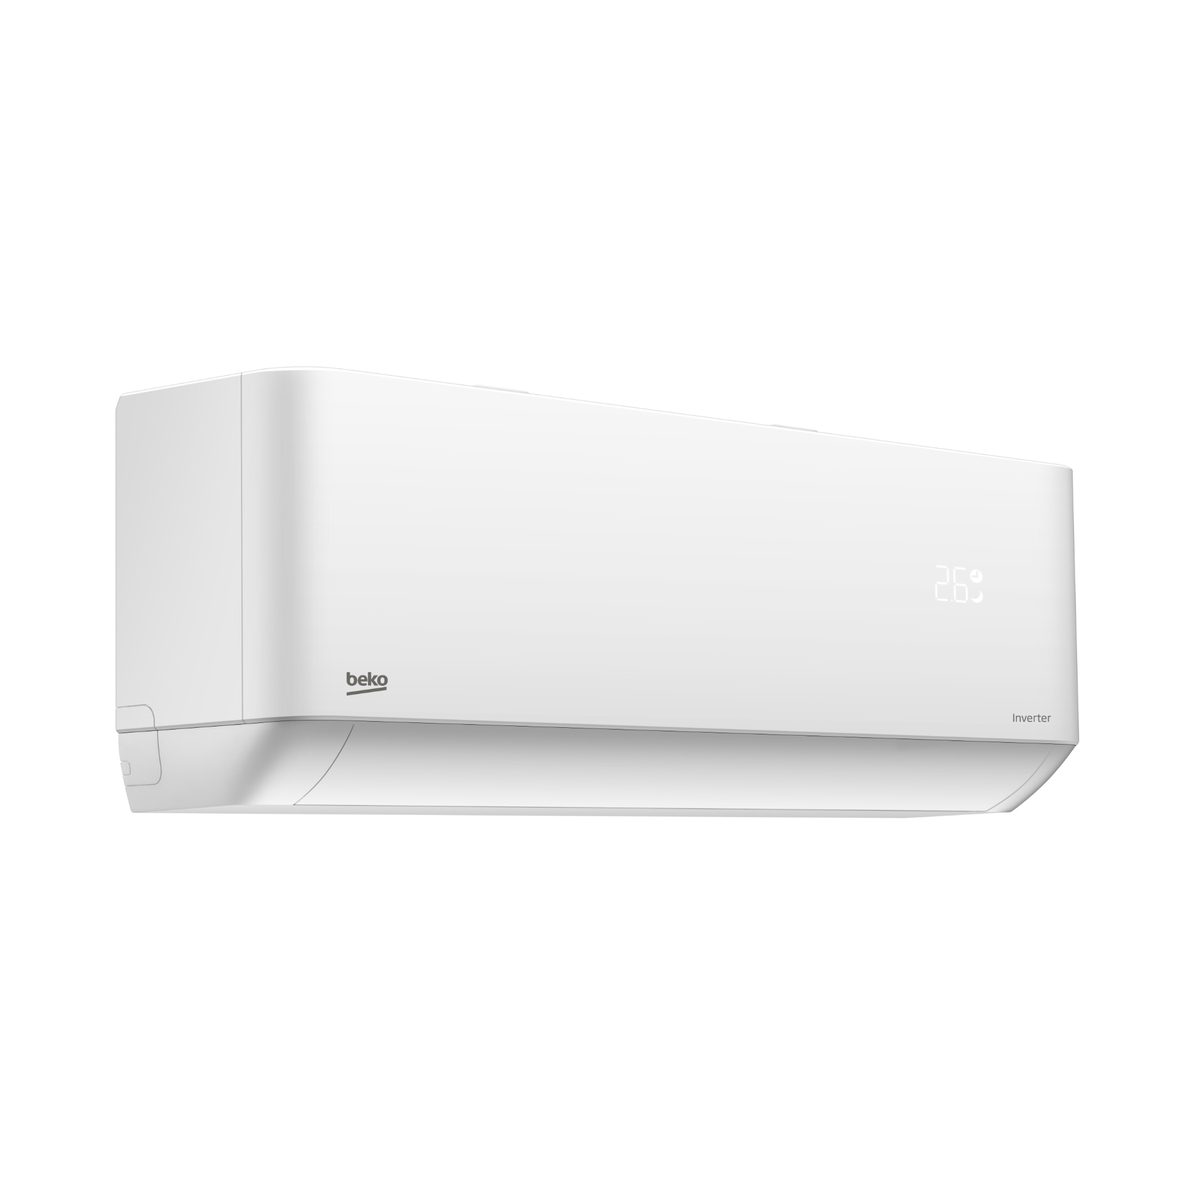 Beko Hot and Cool Split Air Conditioner, 2 T, White, BMVIG240